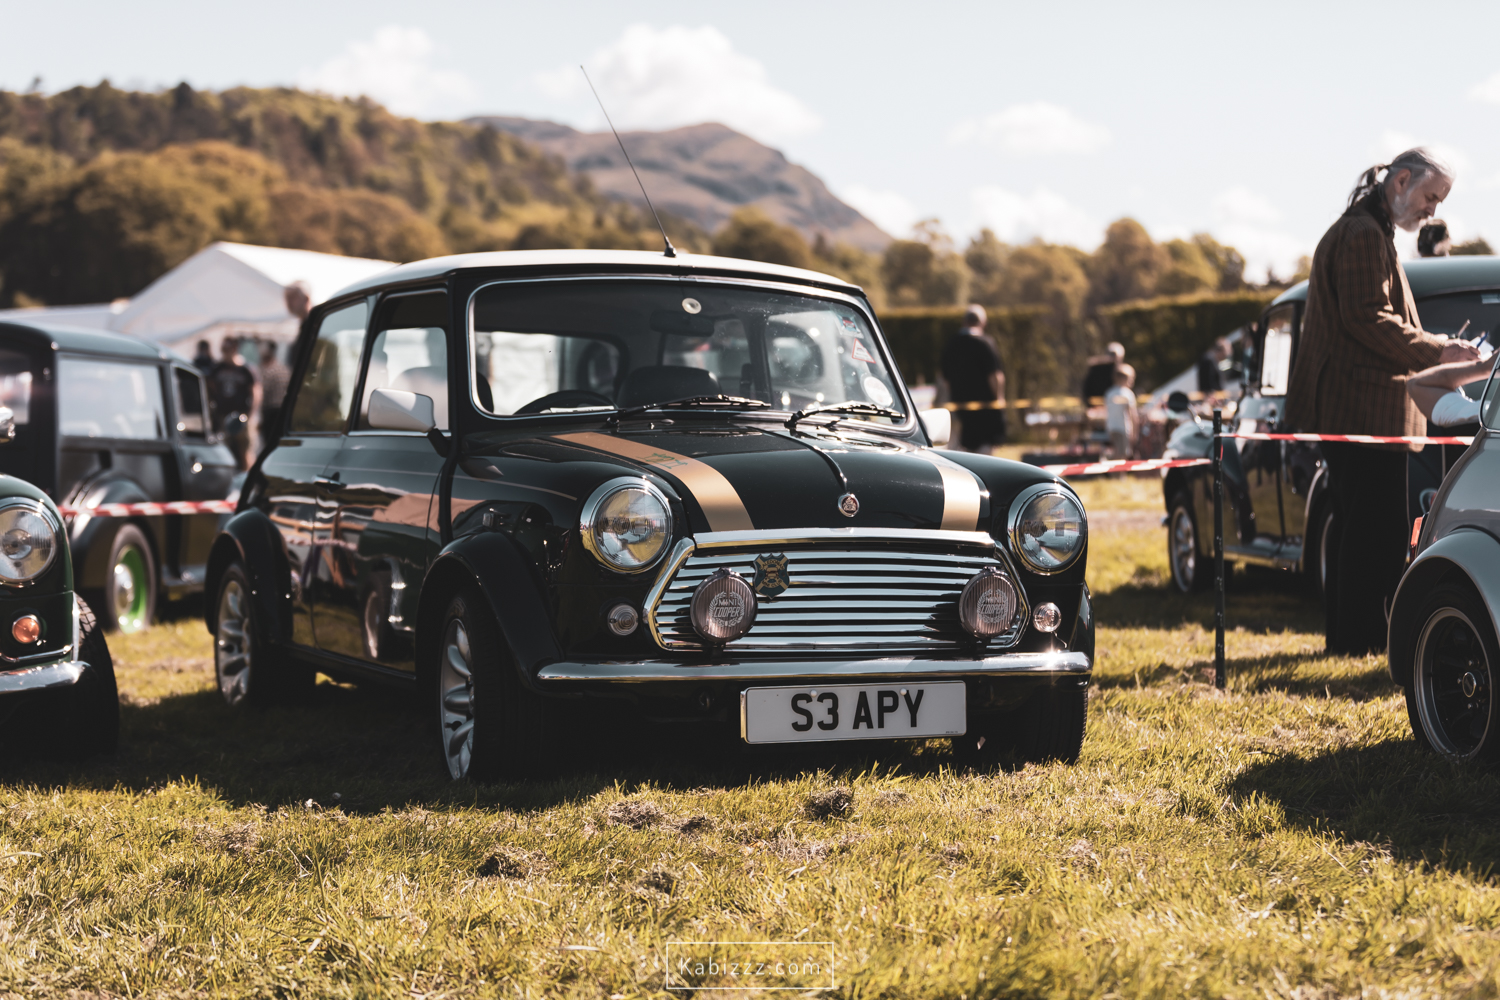 Kabizzz_Photography_Stirling_District_Classic _cars-7.jpg